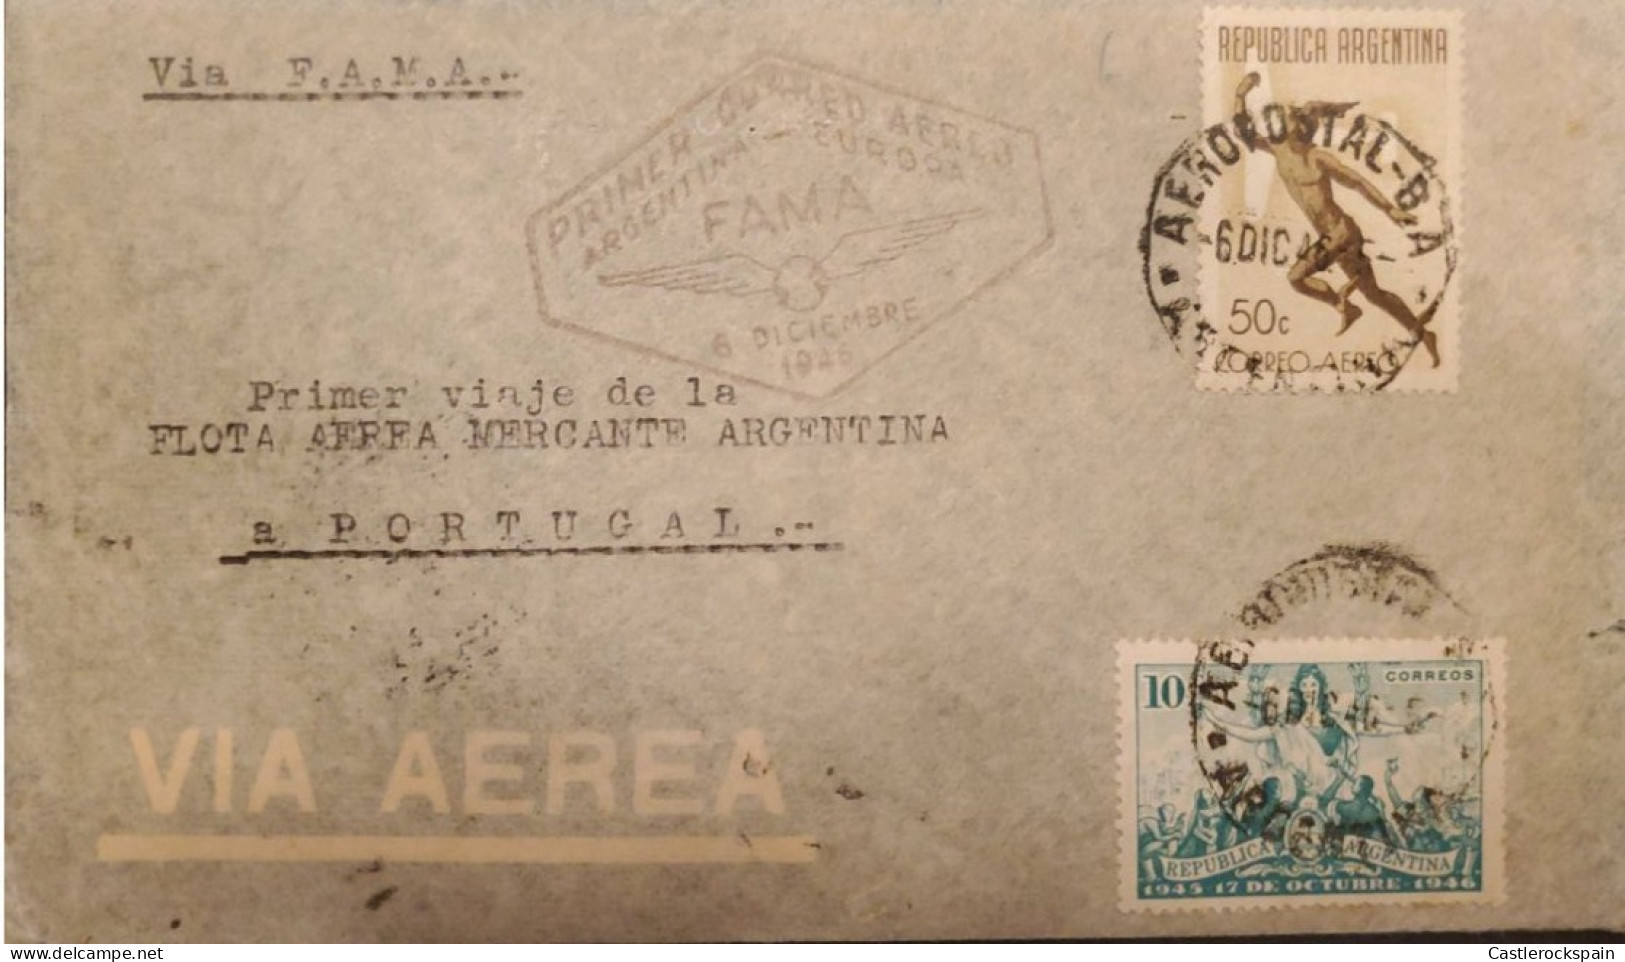 MI) 1946, ARGENTINA, VIA F.A.M.A, AEROPOSTAL, AIR MAIL, FROM BUENOS AIRES TO PORTUGAL, LIBERTY REVOLUTION SALUTING THE P - Used Stamps